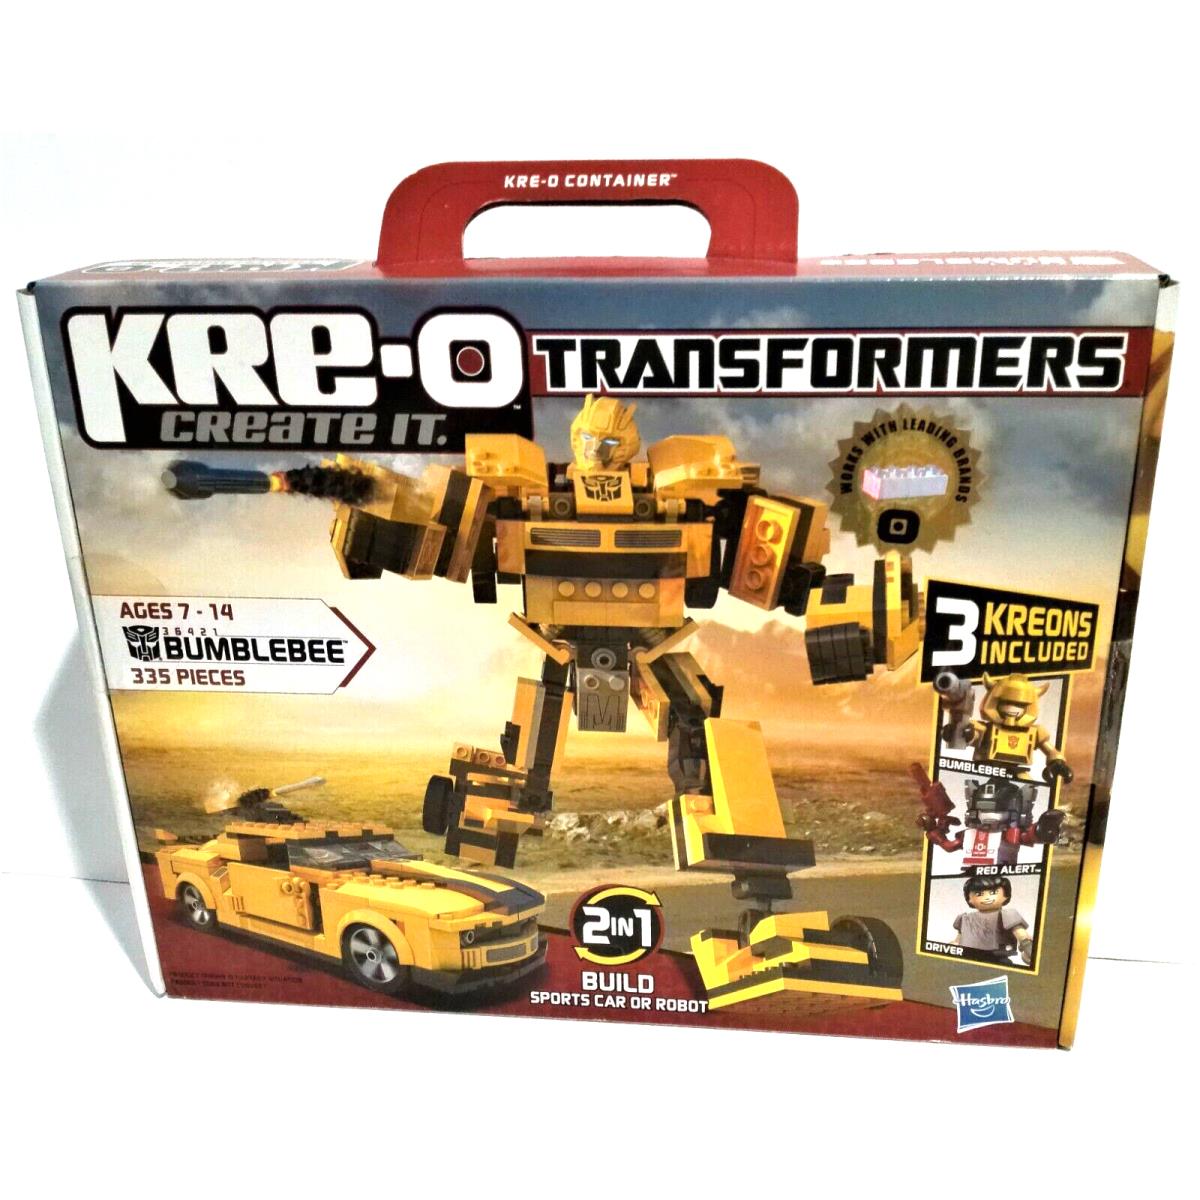 Kre-o Create IT Transformers 36421 Bumbleebee Build Sports Car or Robot Misb